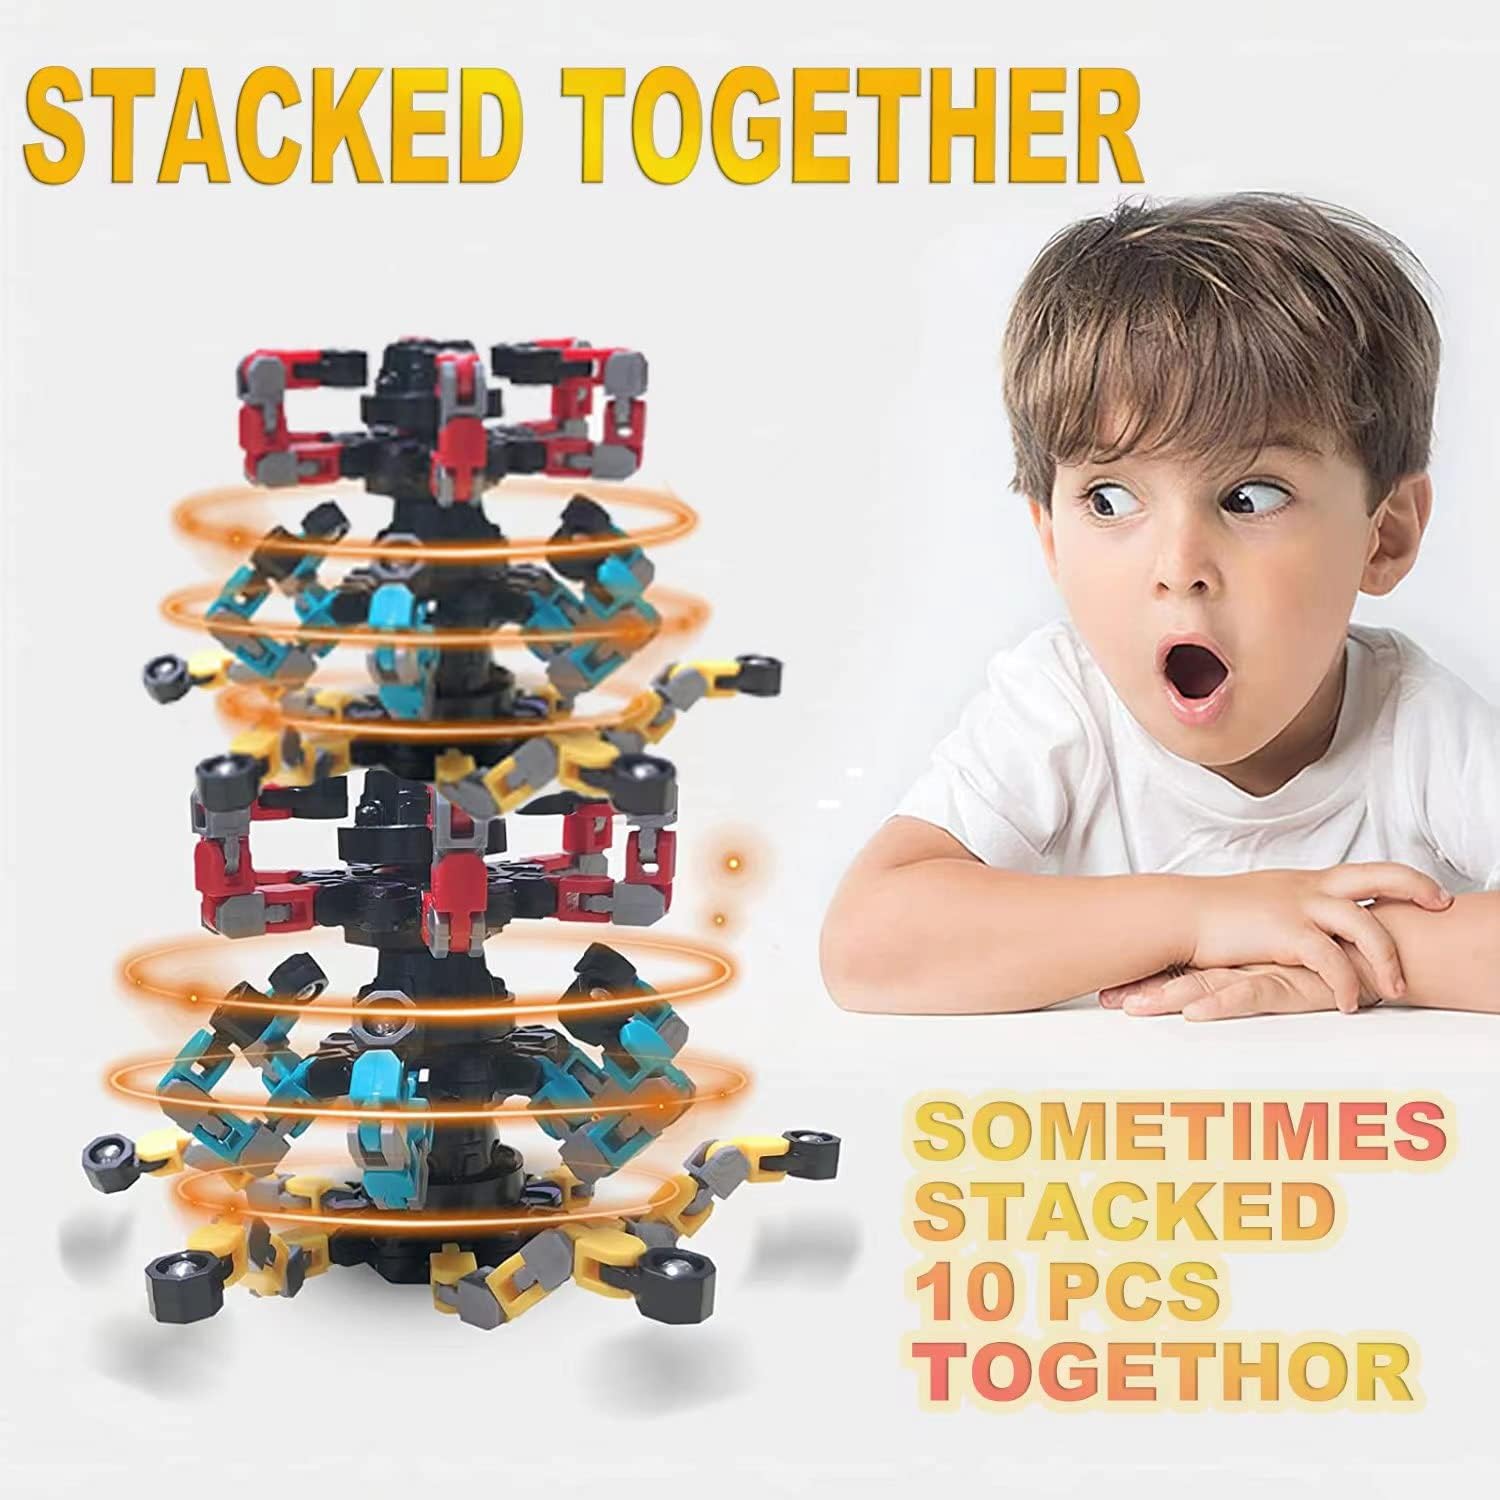 24PCS Fingertip Gyro Fingertip Mechanical Top DIY Deformation Robot Metal Transformable Gyro Spinners Finger Chain Robot Toy Changeable Face Fidget Spinners Octopus ADD ADHD Astium for Kids Adults